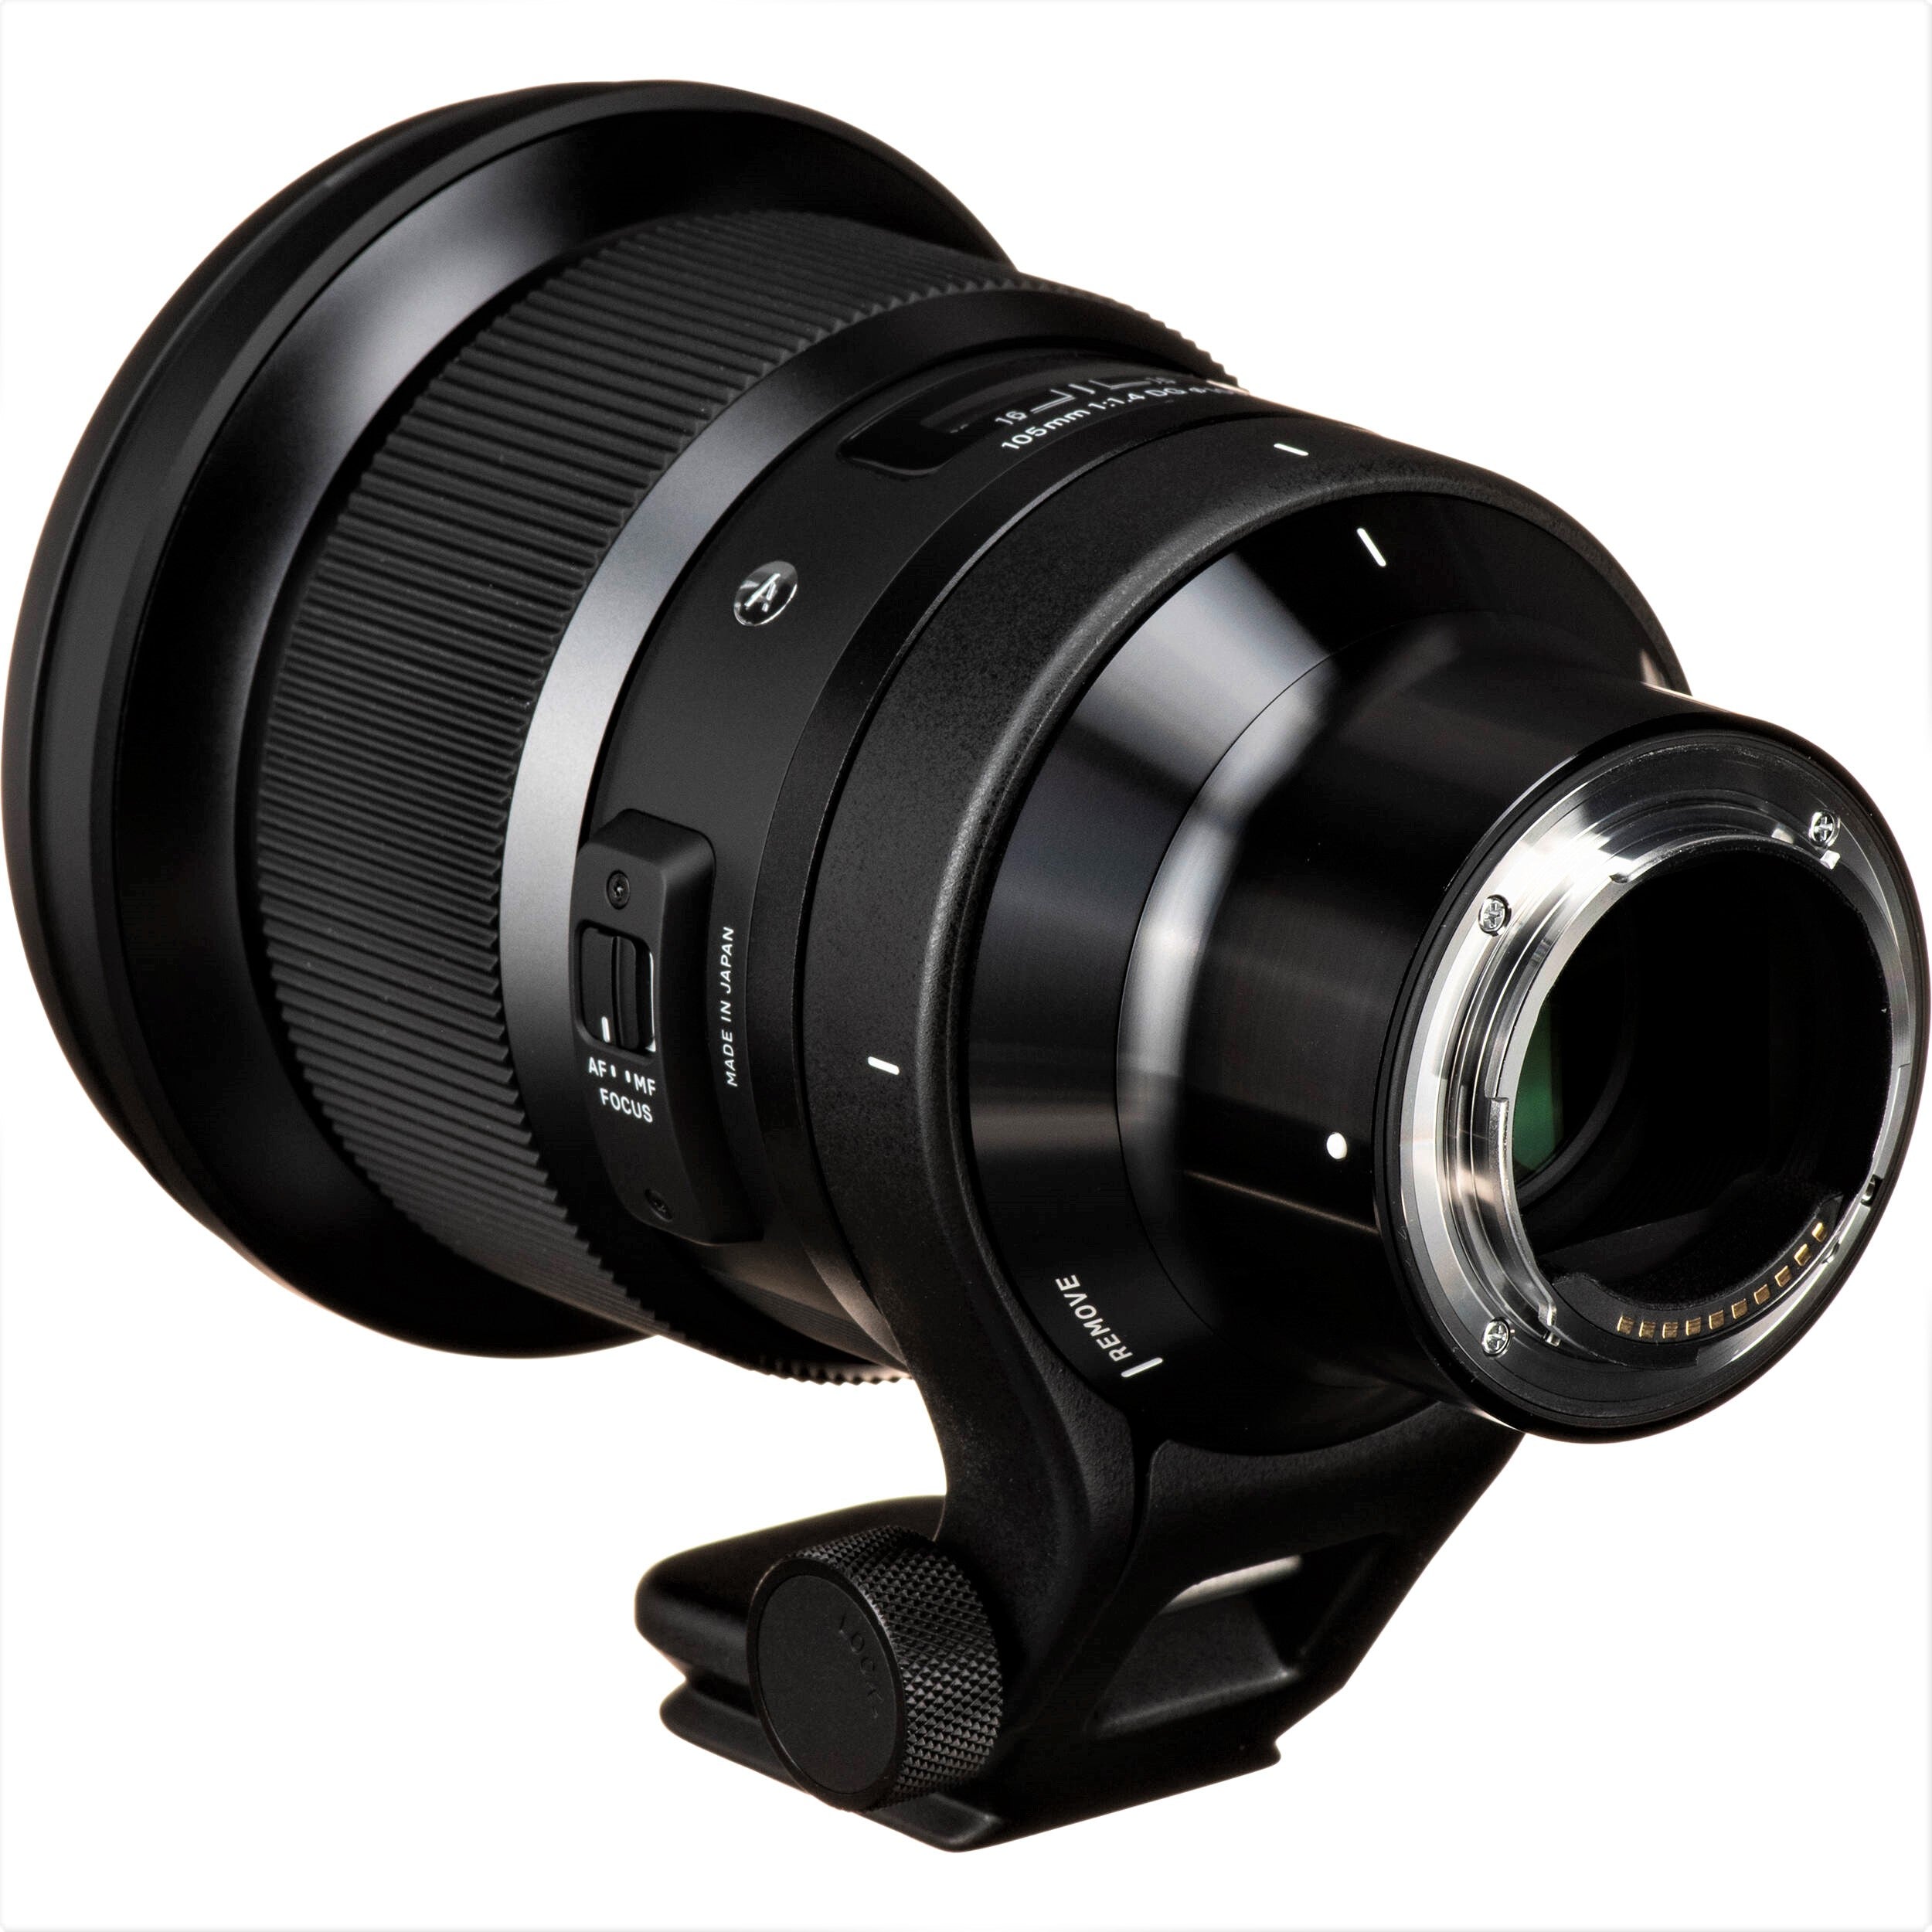 Sigma 105mm F1.4 DG HSM Art Lens for Sony E in a Back-Side View